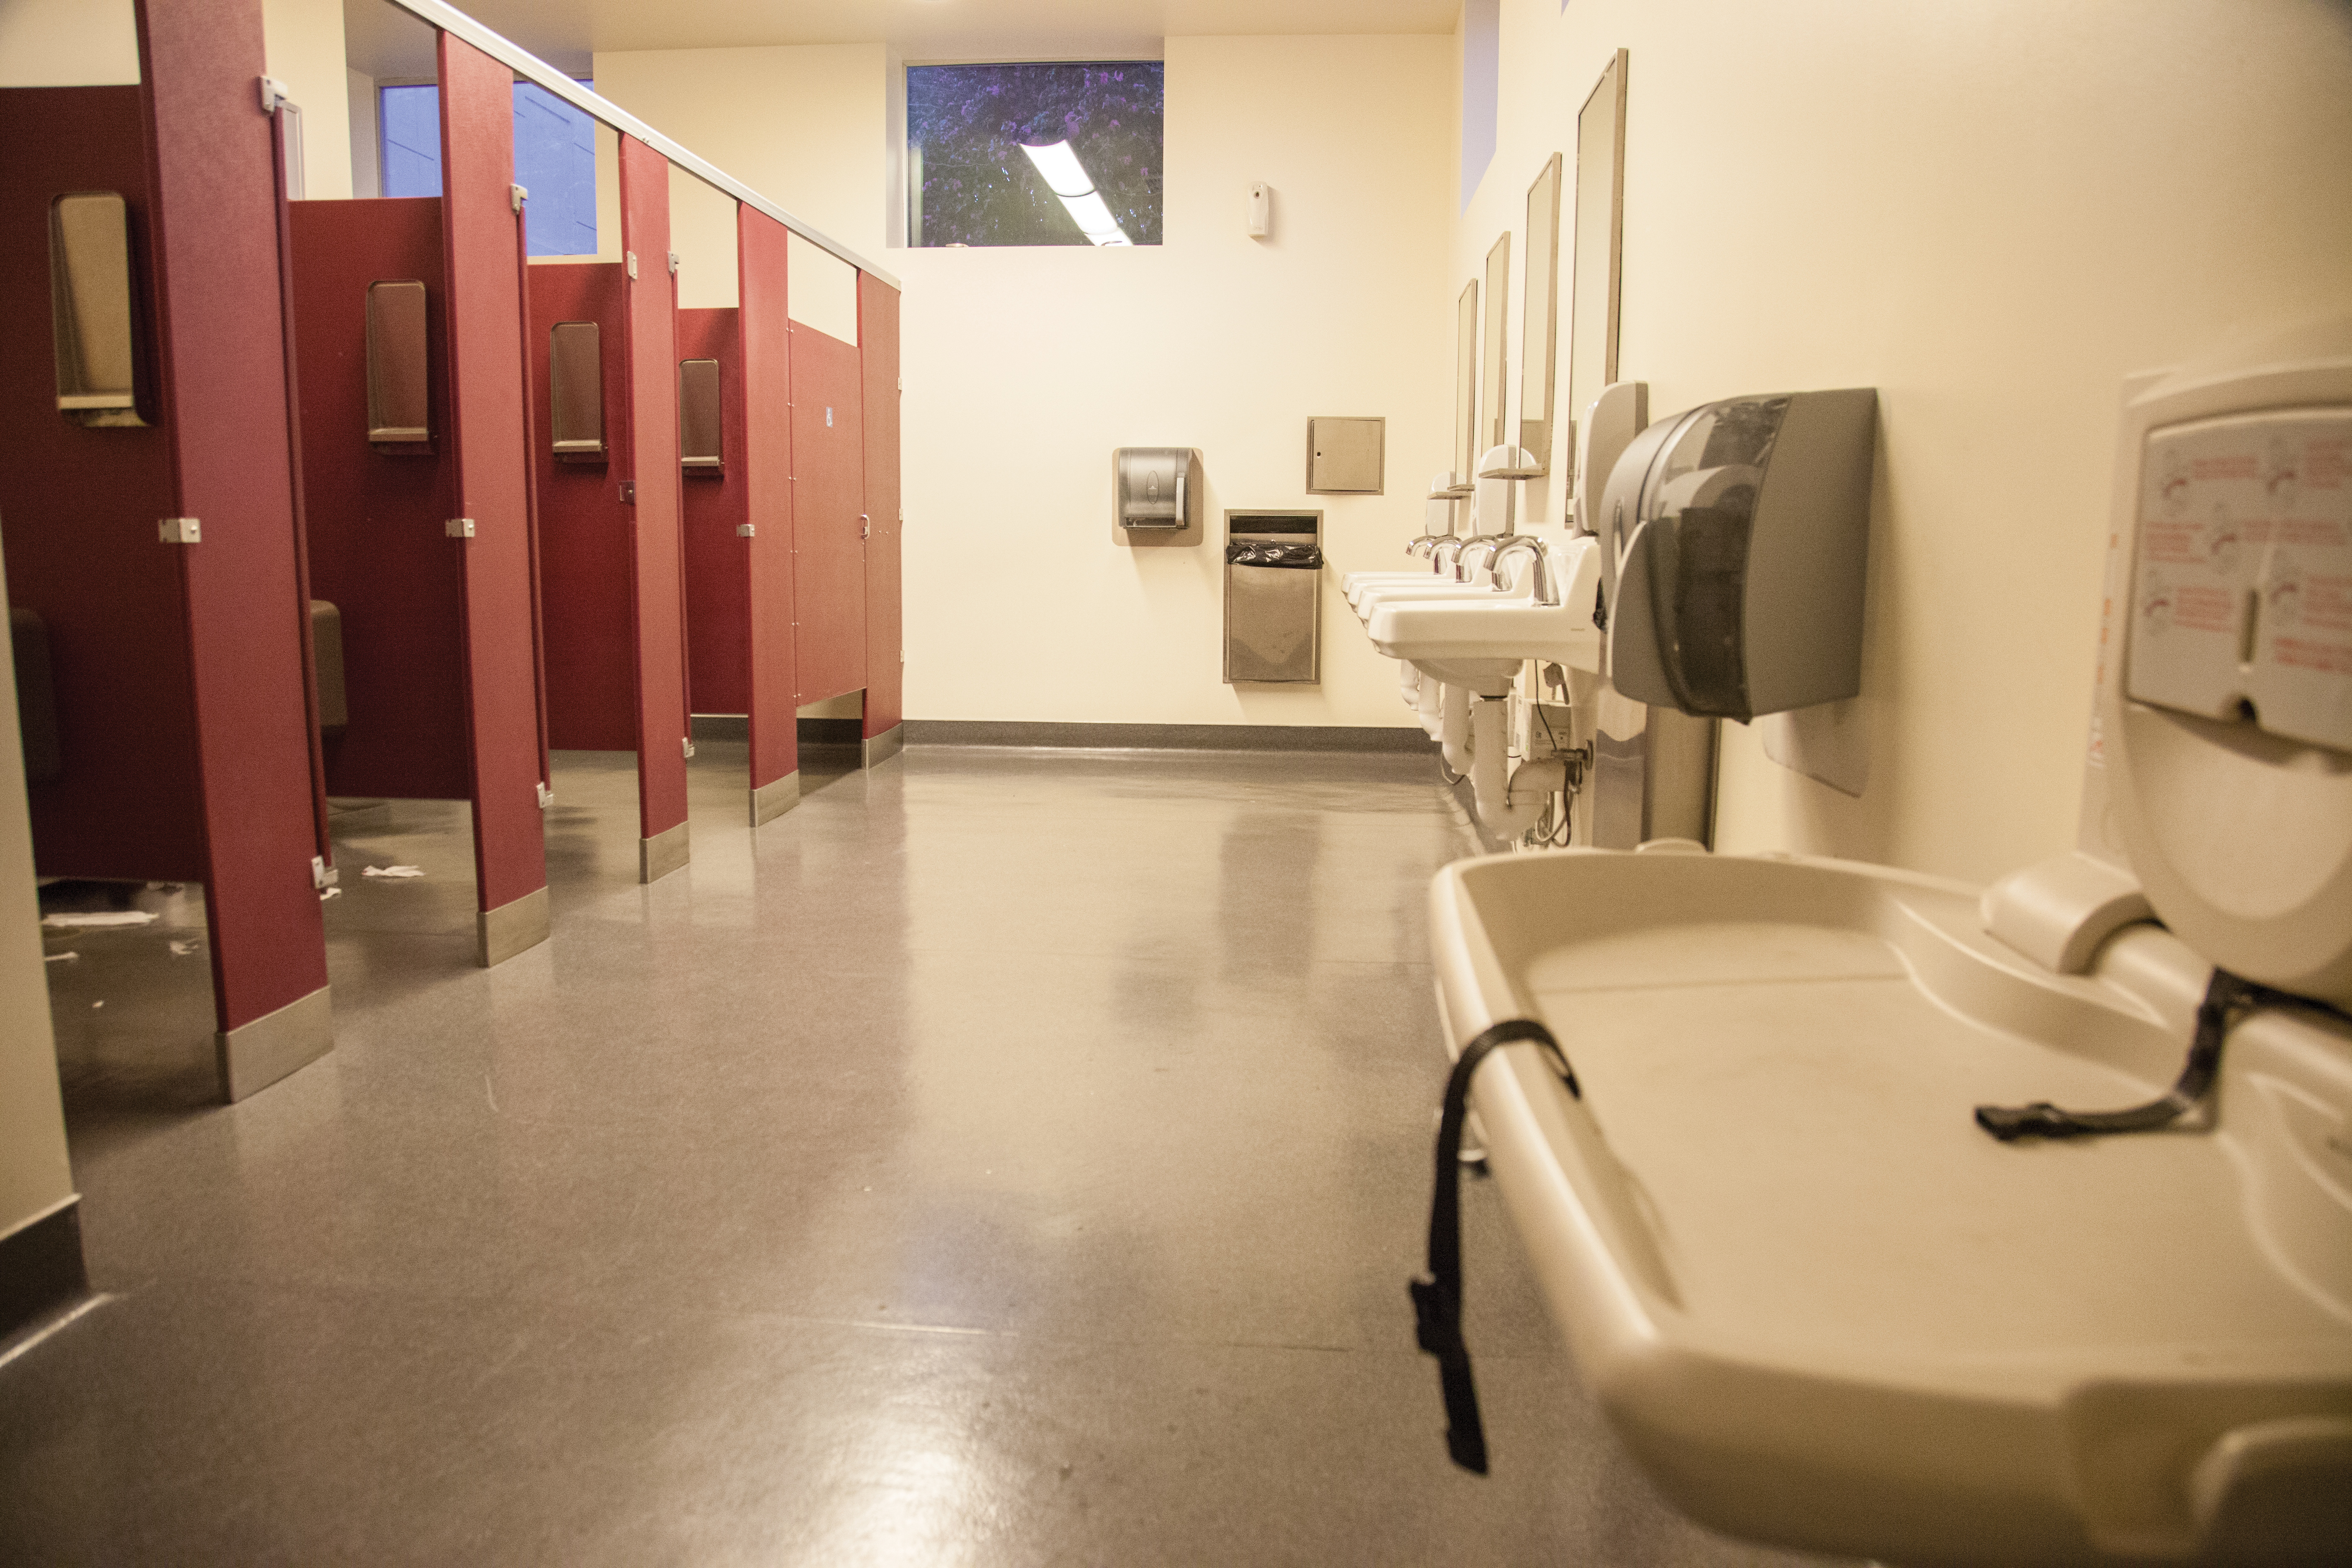 There's something captivating about the bathroom in the North Gym, from its wide-open spaces to its calming colors.